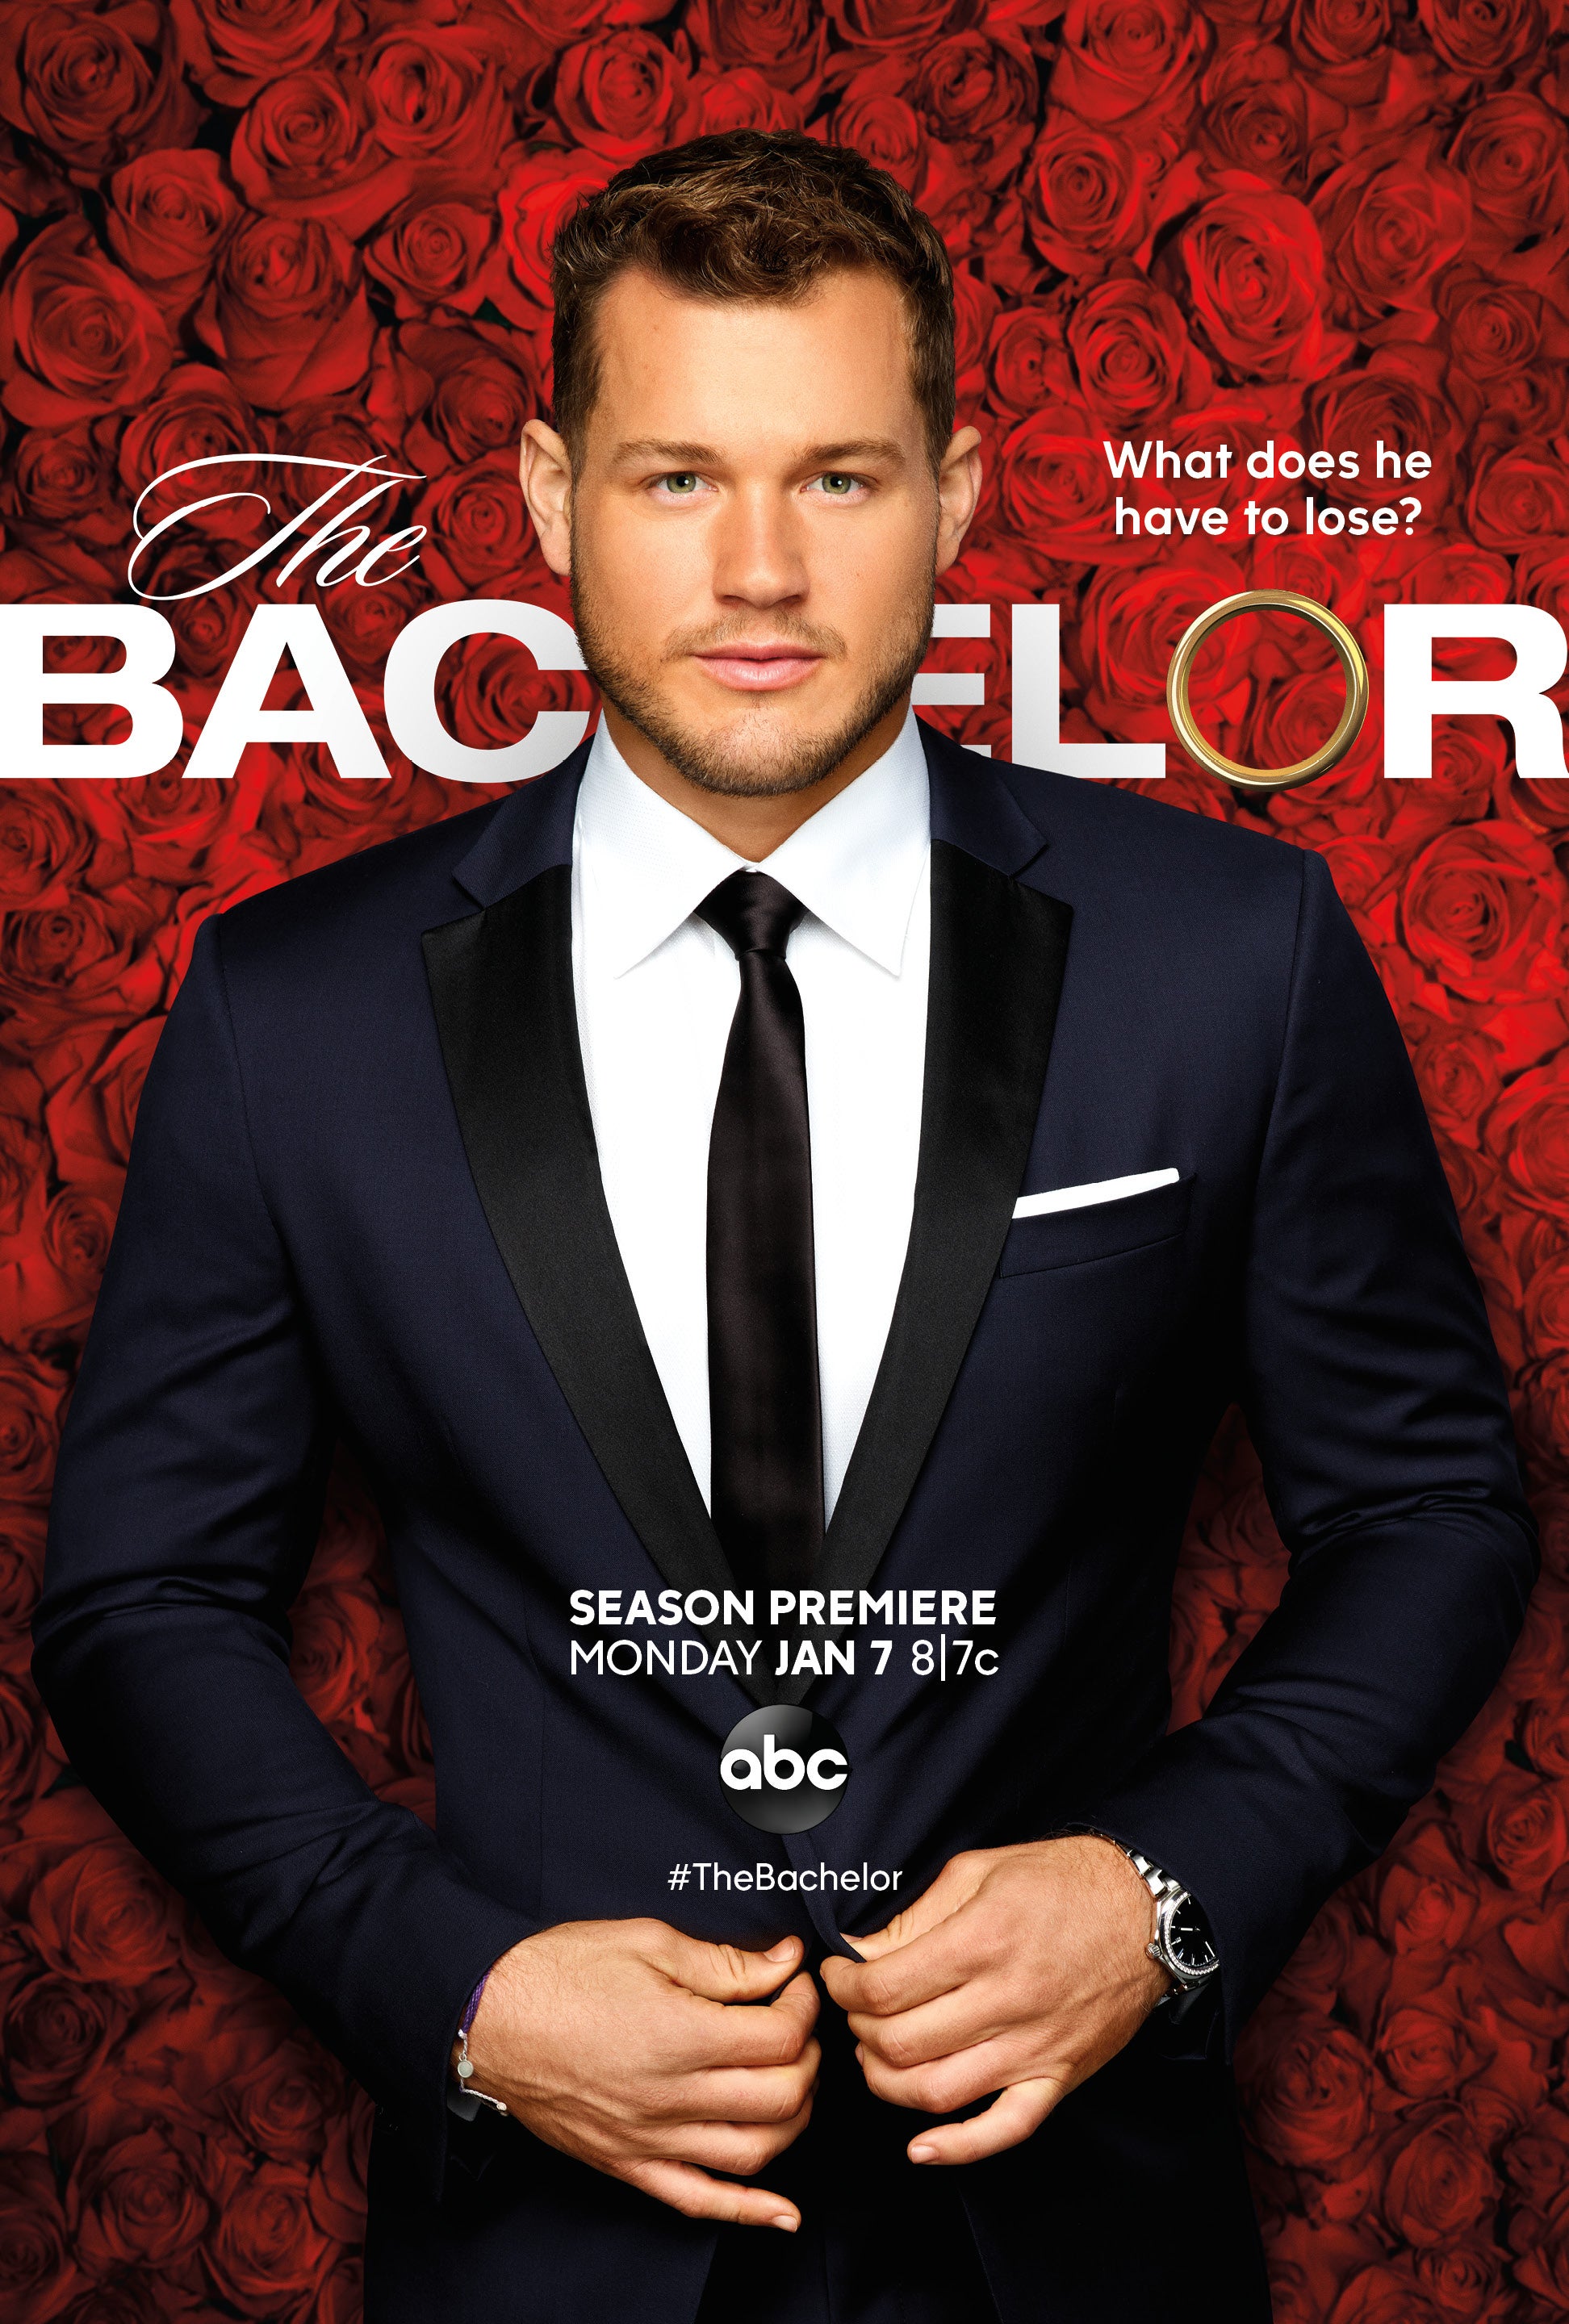 Colton Underwood's New 'Bachelor' Poster Hints at His Virginity